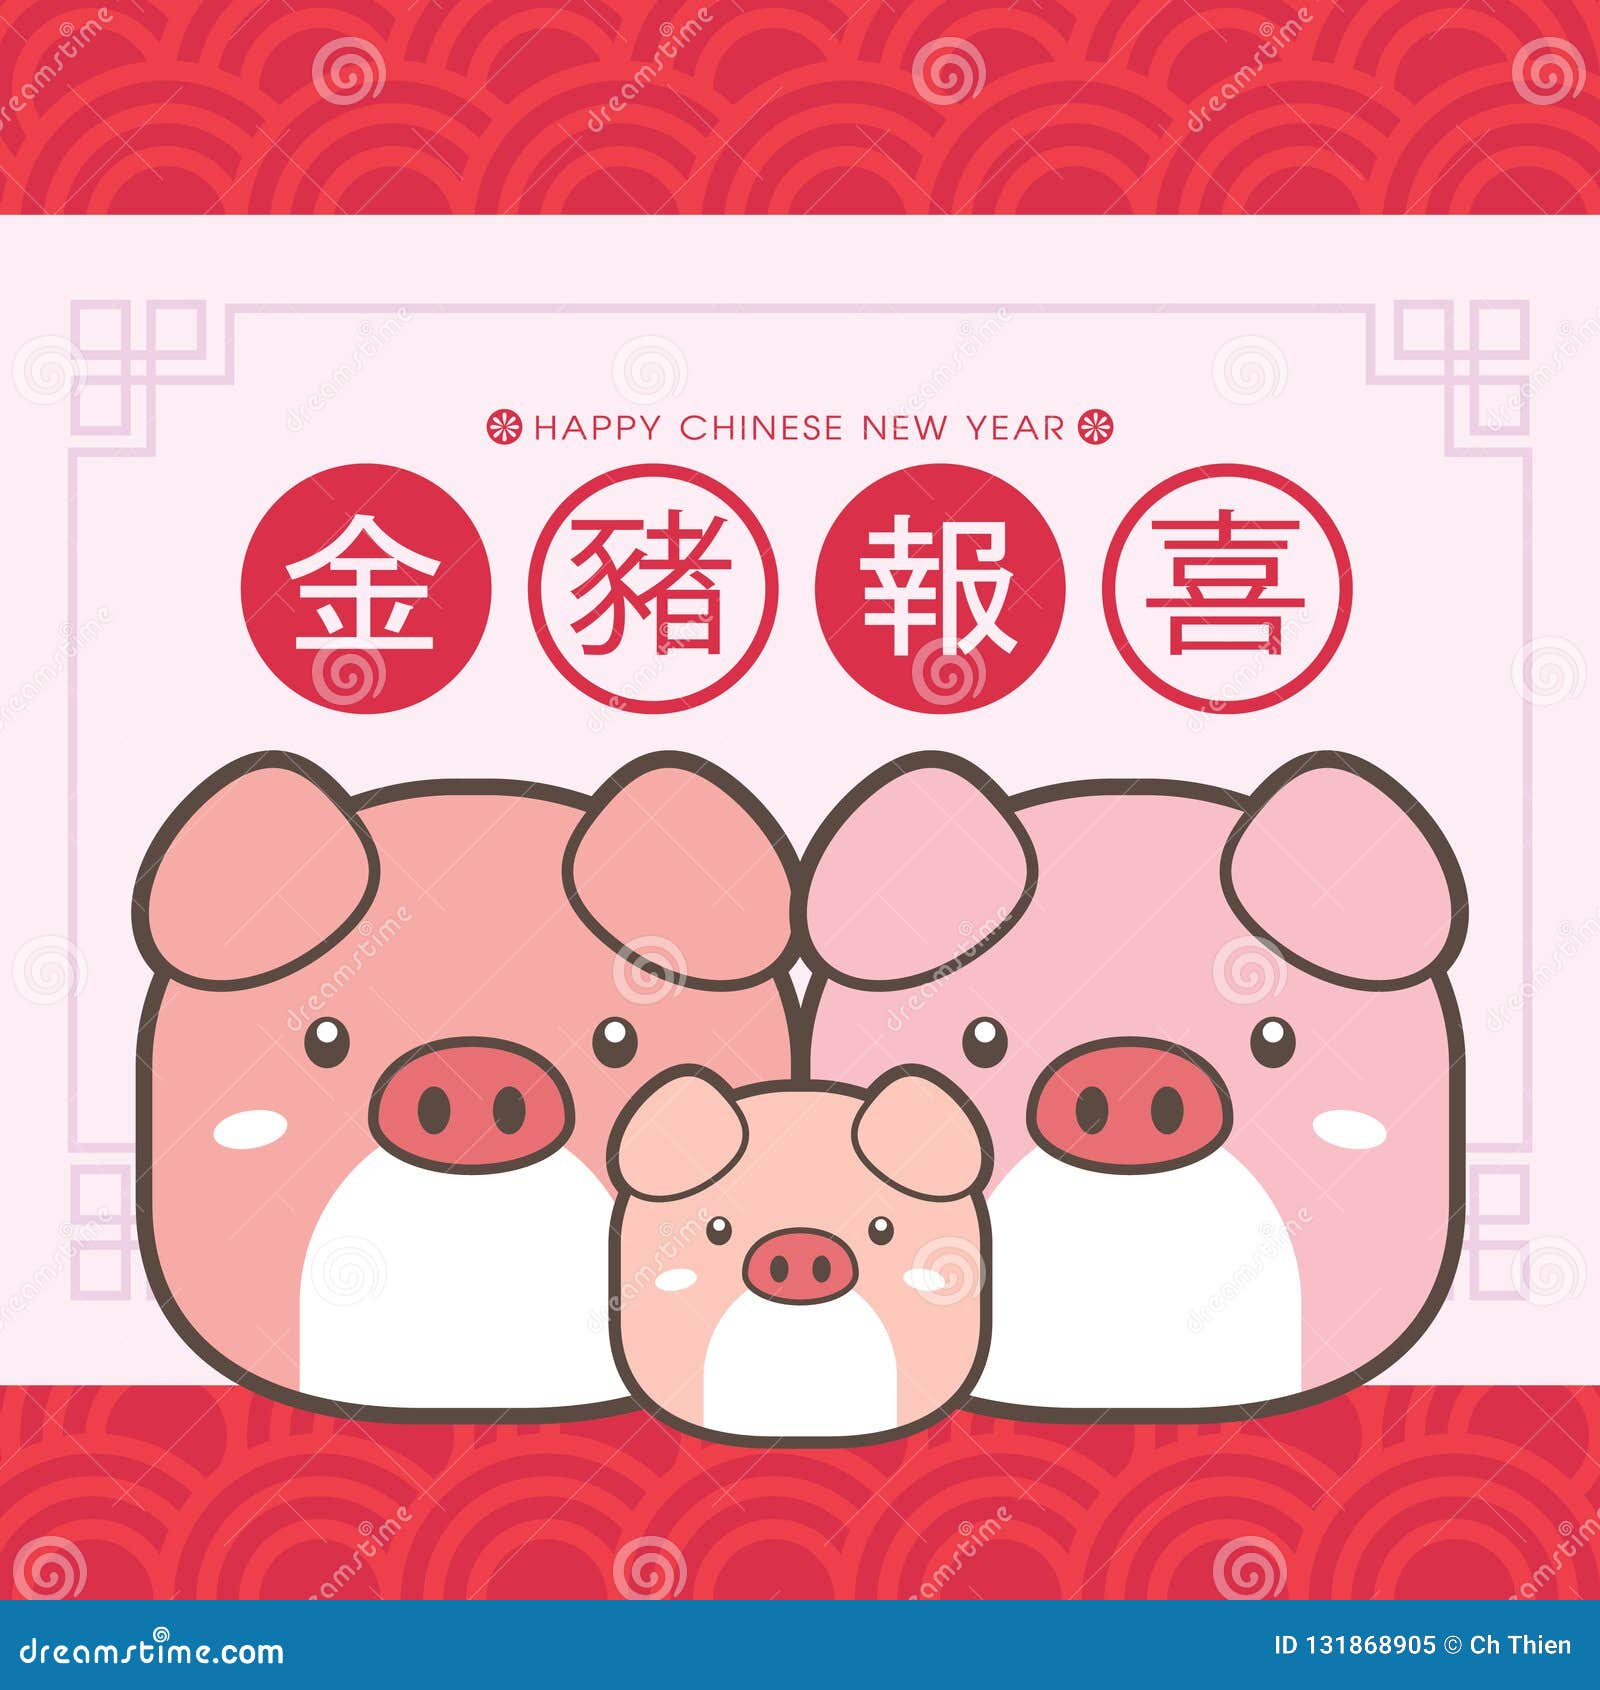 2019 Chinese New Year Greeting Card Template. With Cute ...